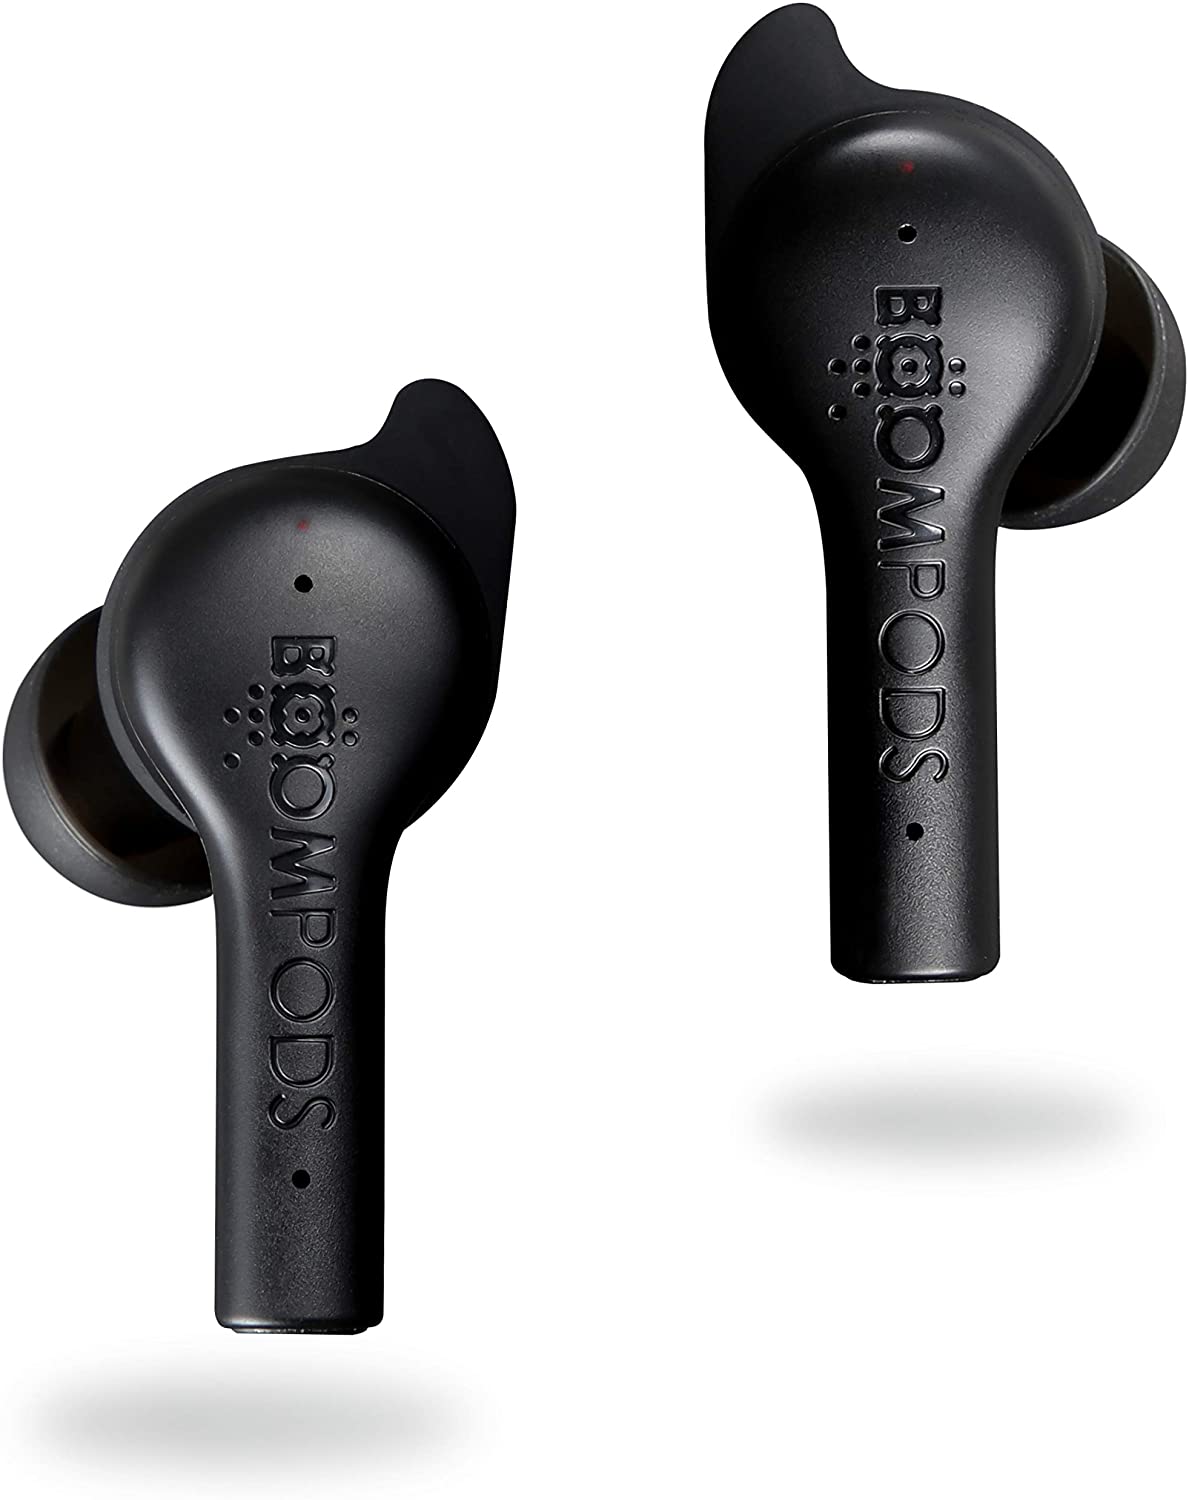 BOOMPODS BASSLINE ANC TRUE WIRELESS – ACTIVE NOISE CANCELLING BLUETOOTH IN-EAR HEADPHONES [ACCESSORIES]